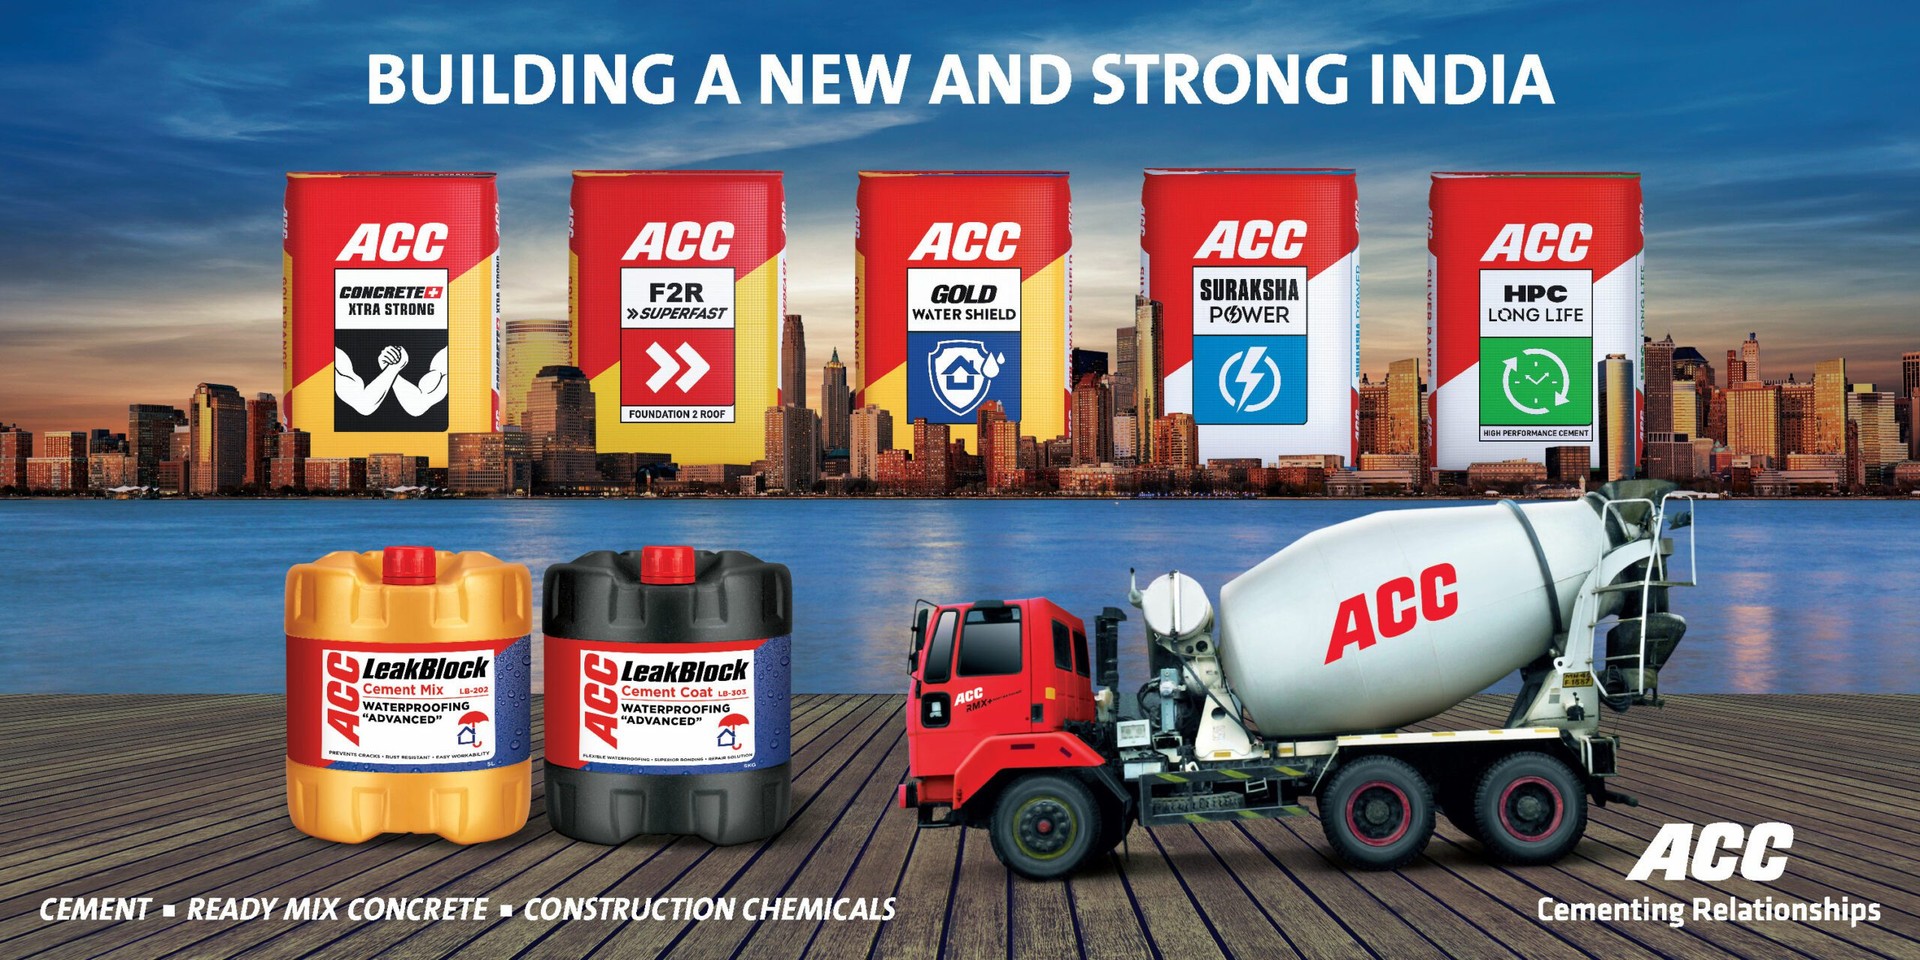 SWOT Analysis of ACC - ACC Limited Range of Products